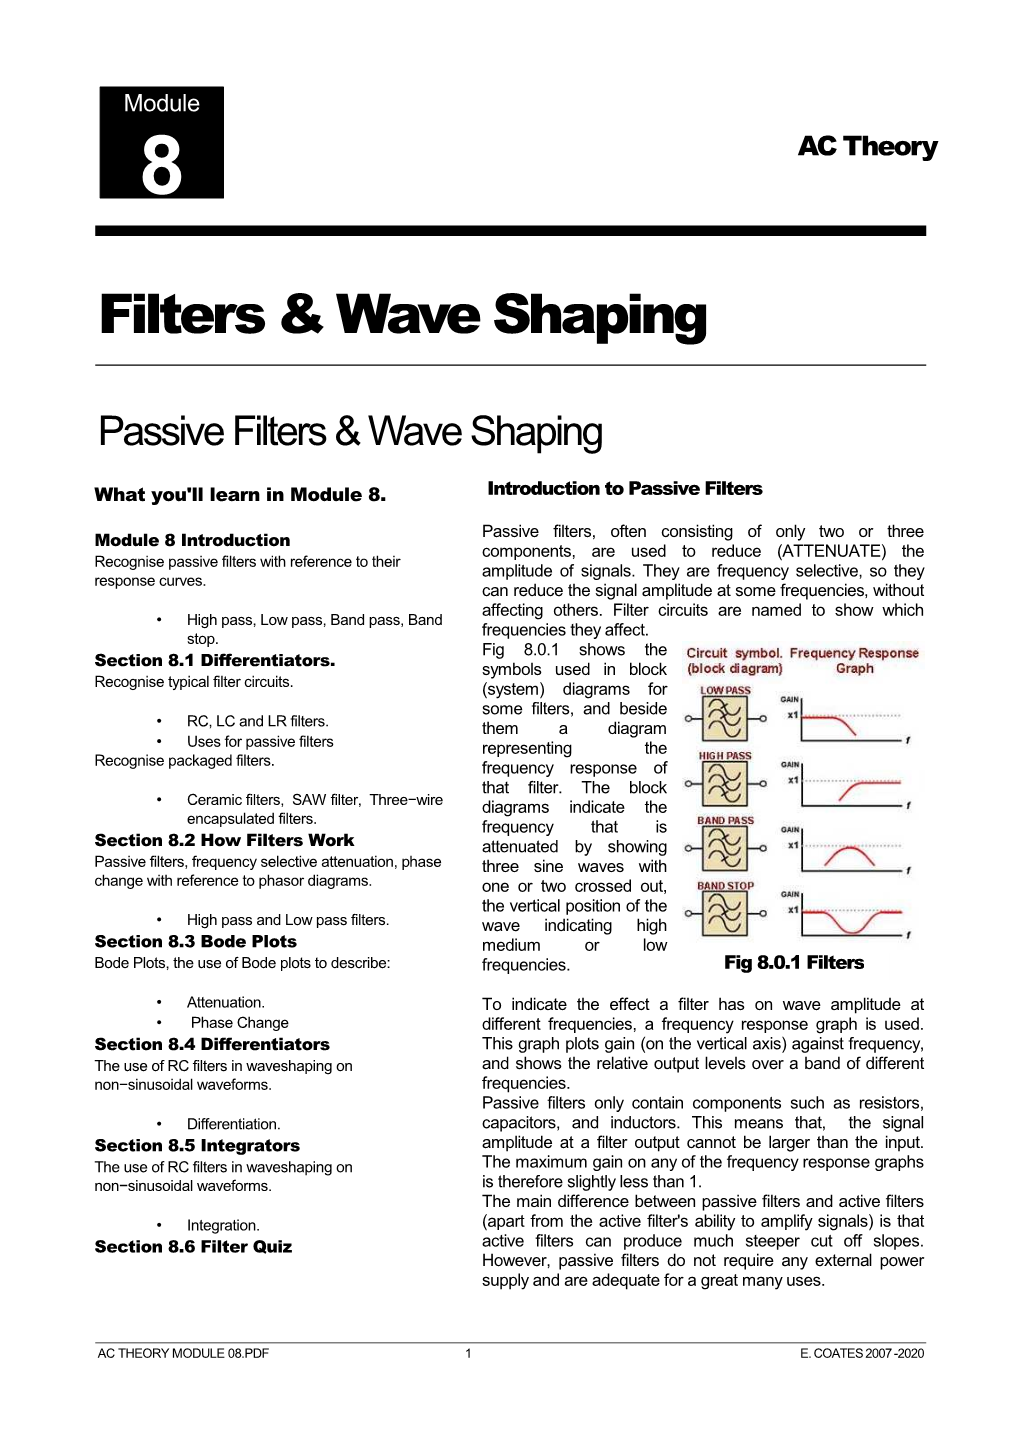 Filters & Wave Shaping